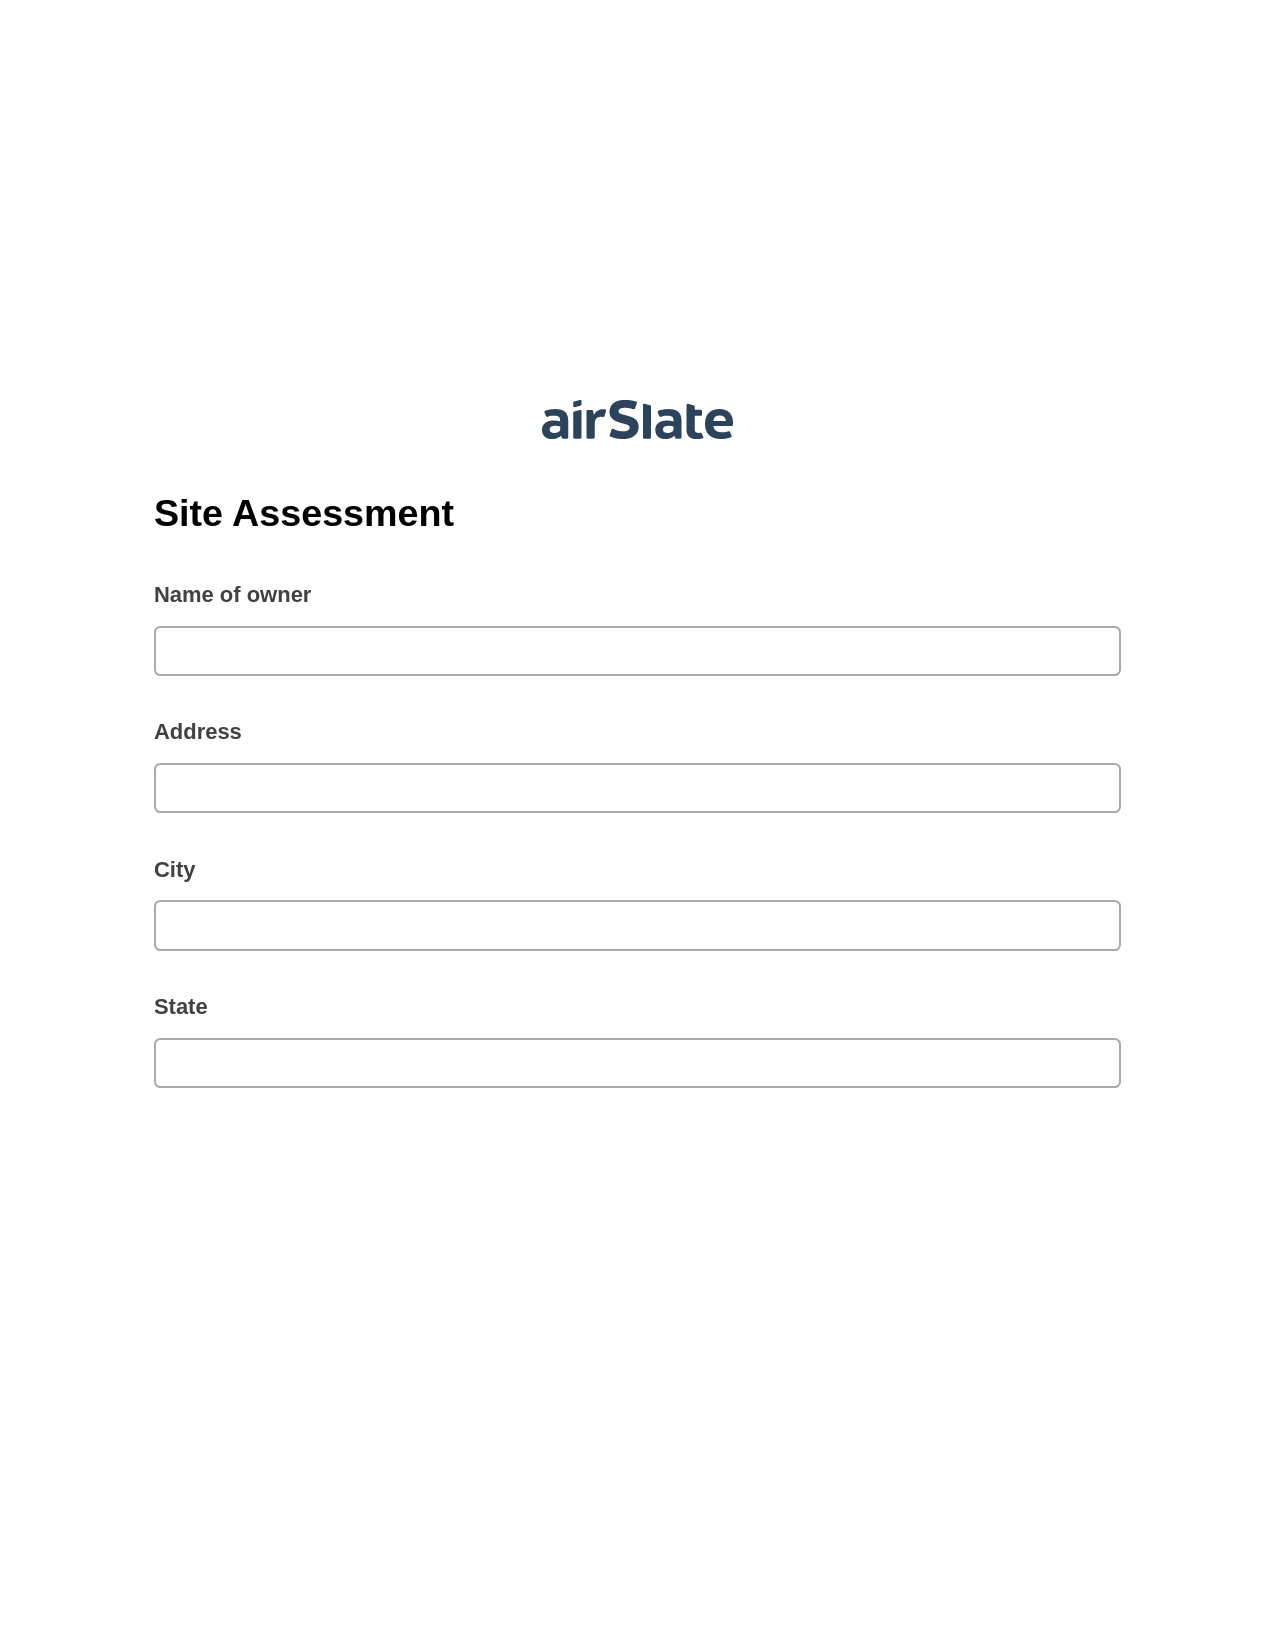 Site Assessment Pre-fill Dropdown from Airtable, Invoke Salesforce Process Bot, Export to Salesforce Bot